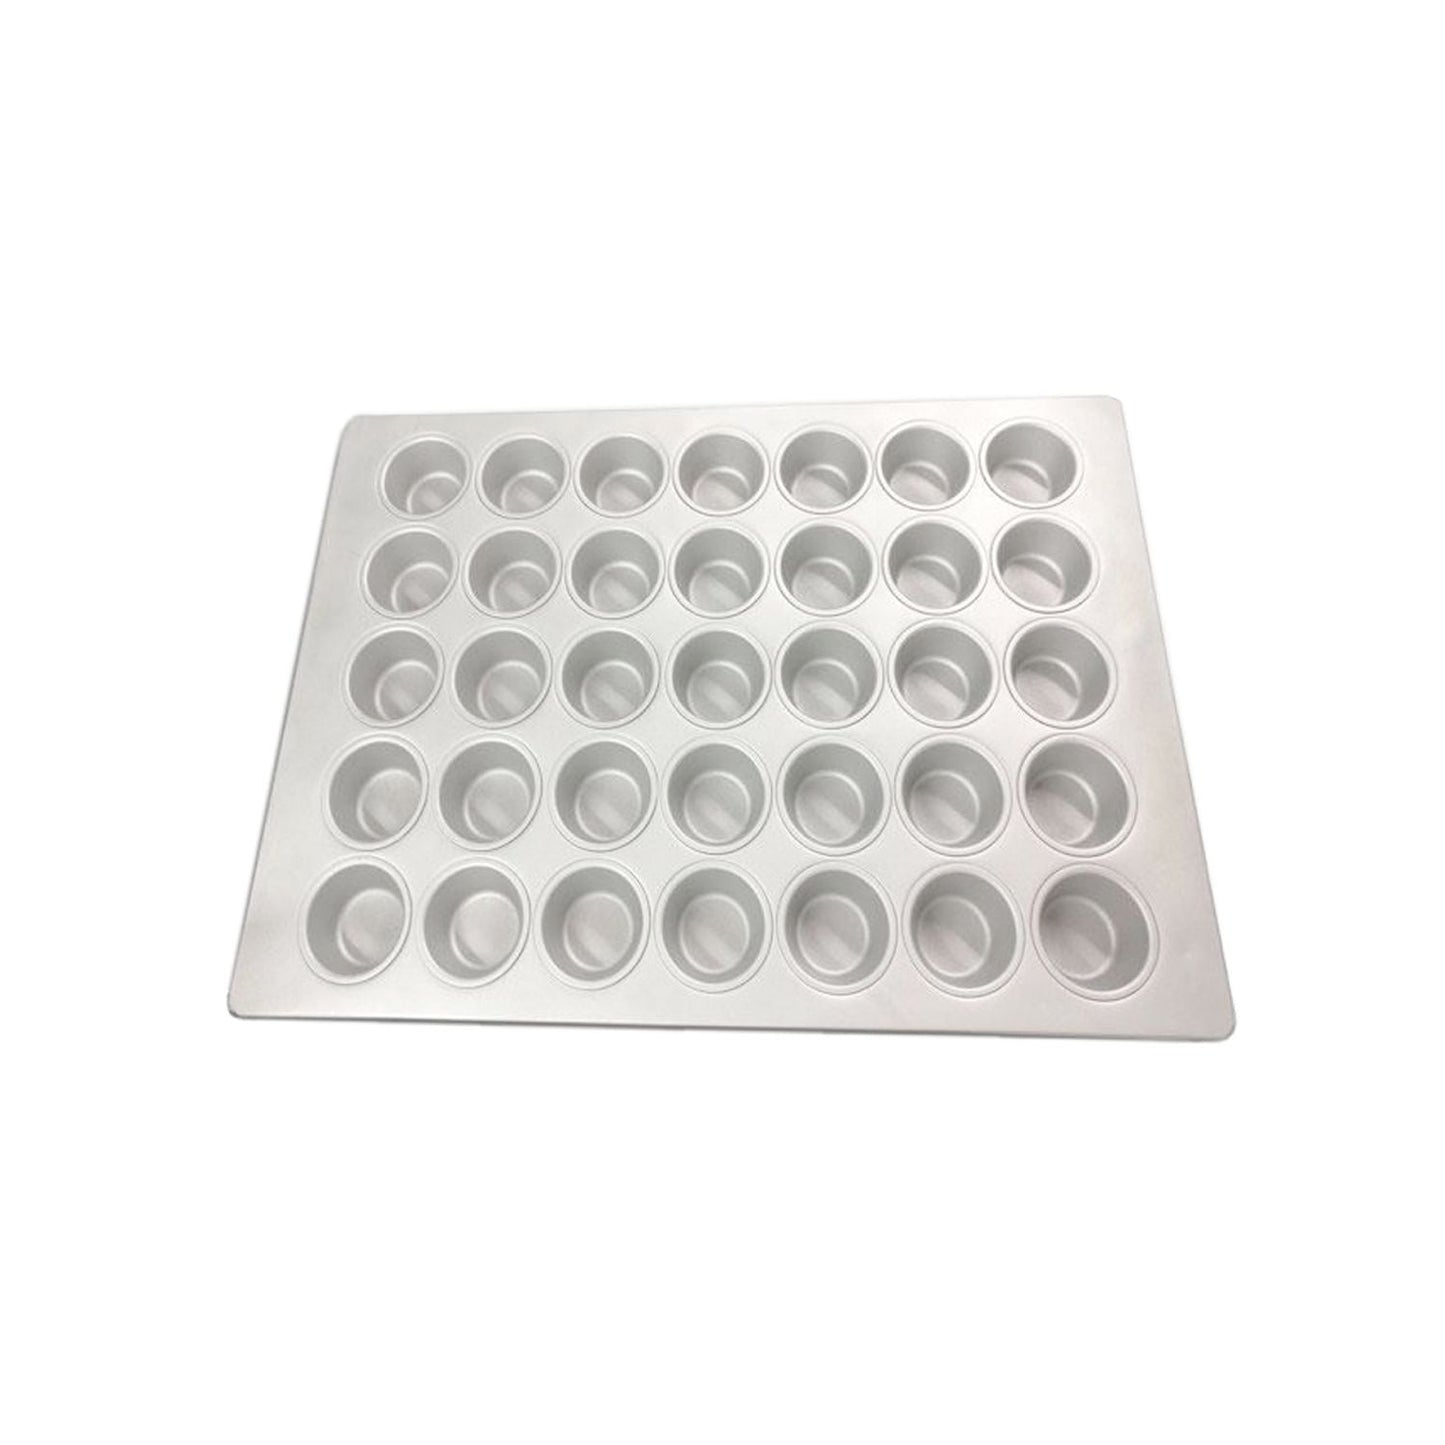 35 Cups Cake Commercial Tray - 65 x 45 cm - Cup Size 7 x 5 cm ( 3.5 cm High )